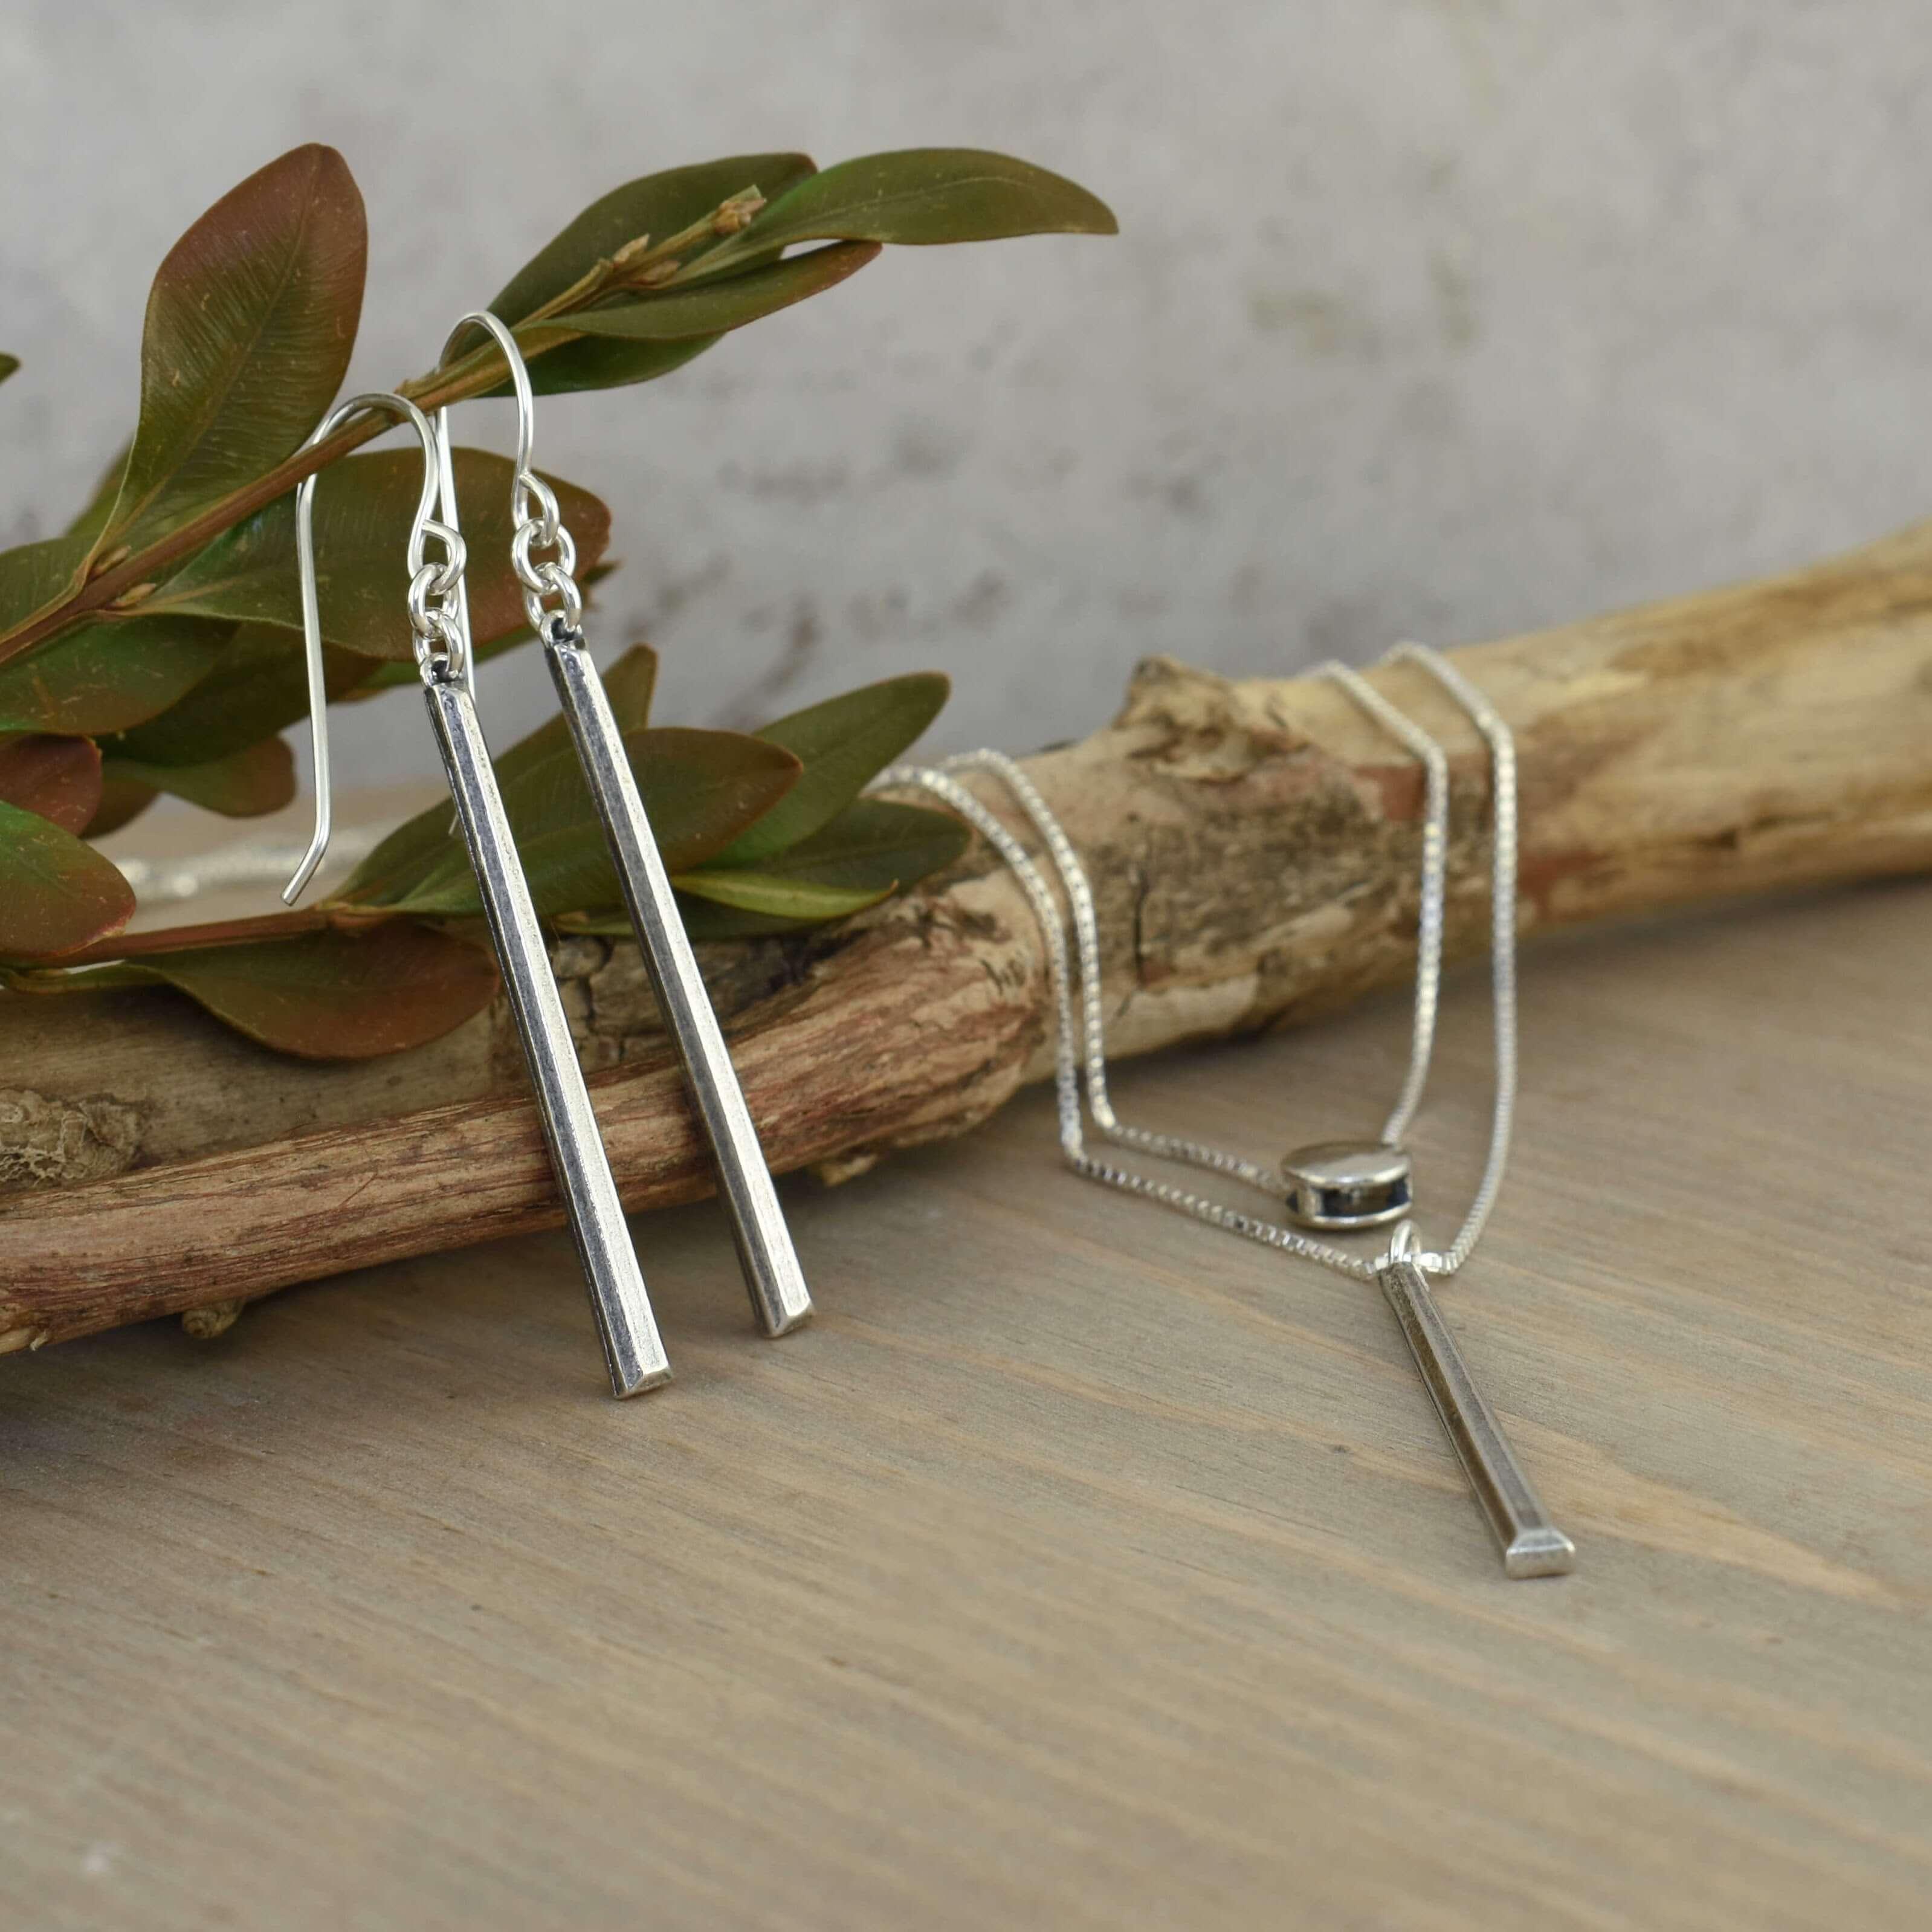 Designer Earrings and Necklace in handcrafted sterling silver